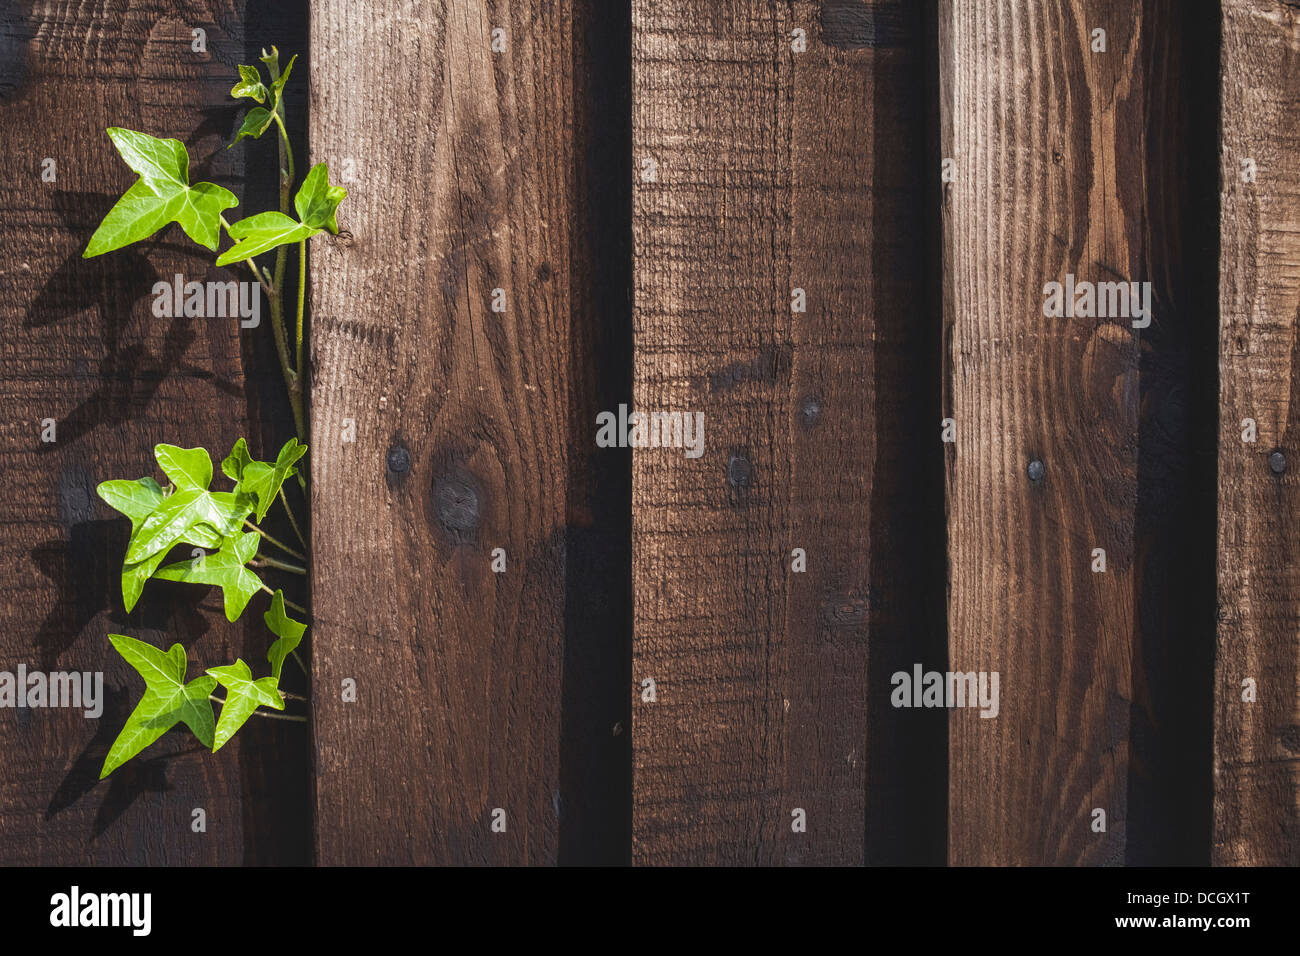 Ivy growing through a wooden fence Stock Photo